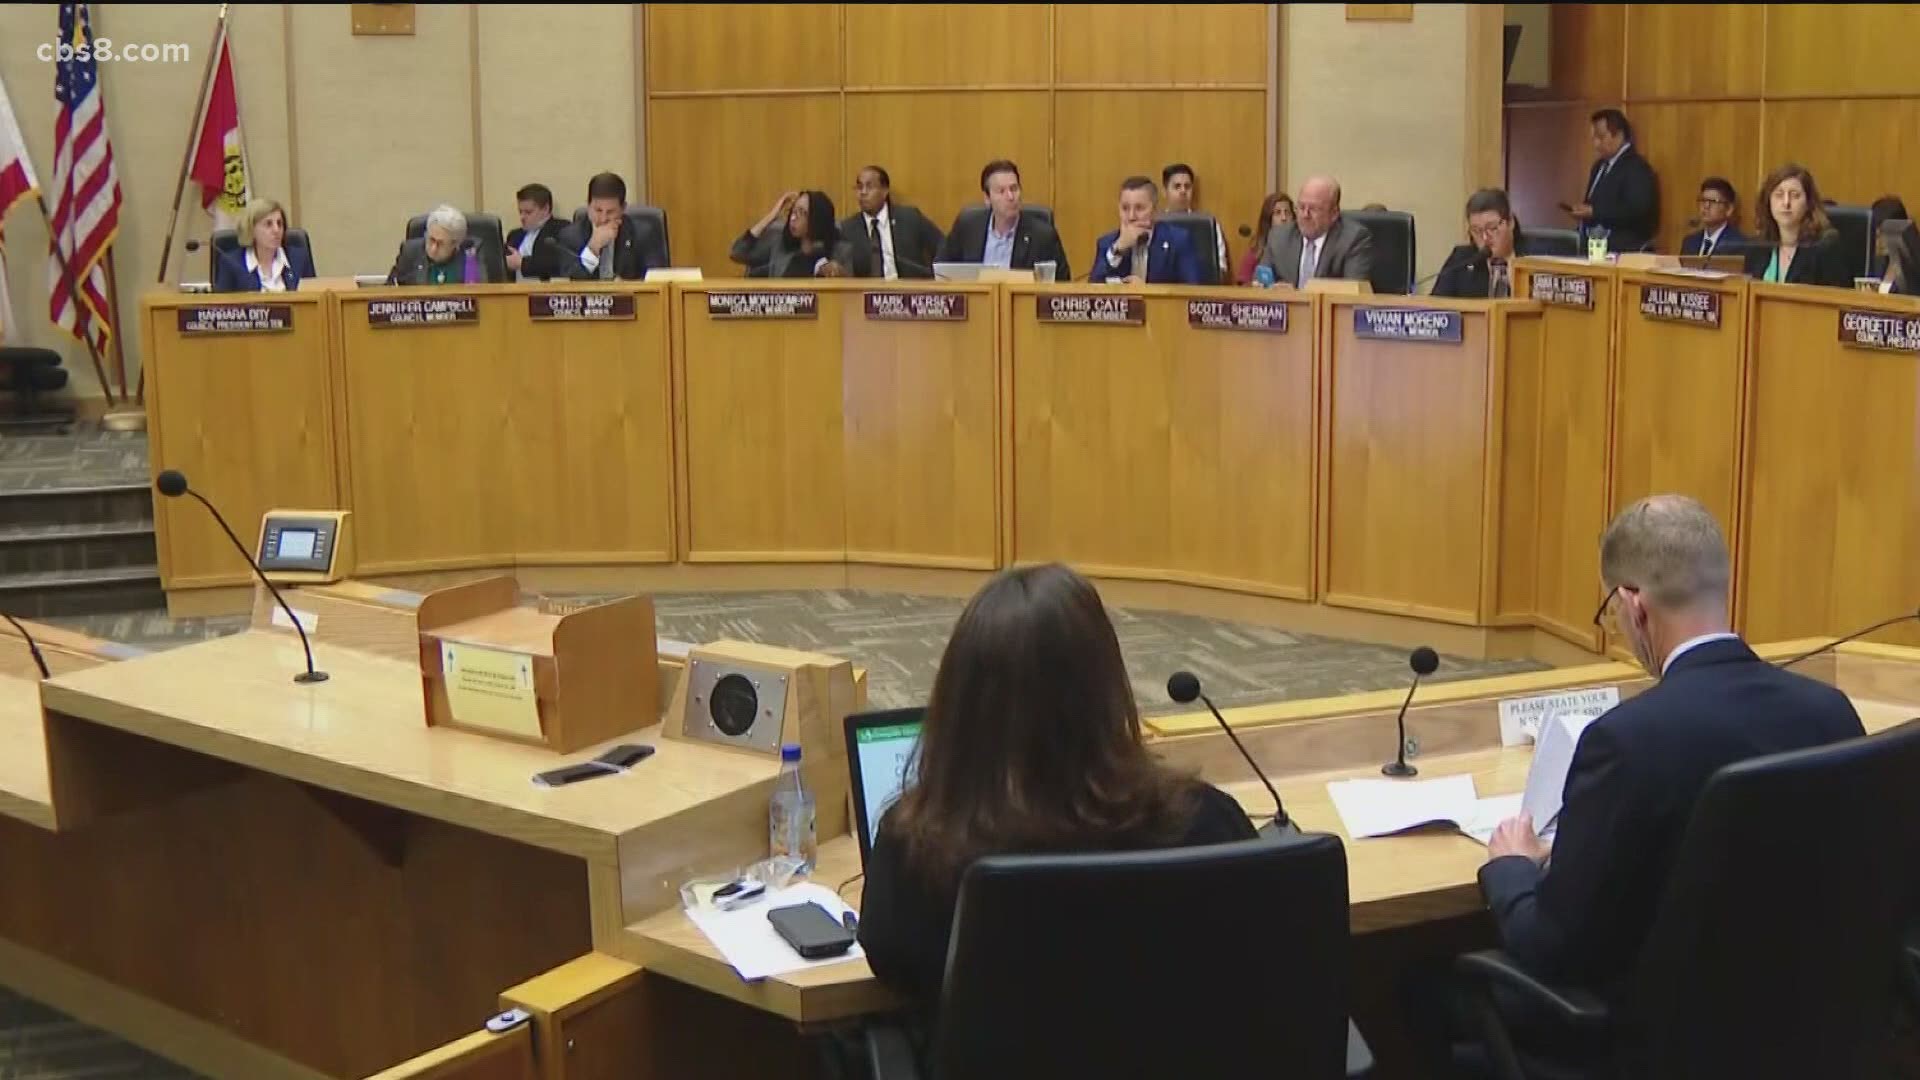 San Diego city council members explain approval of budget with